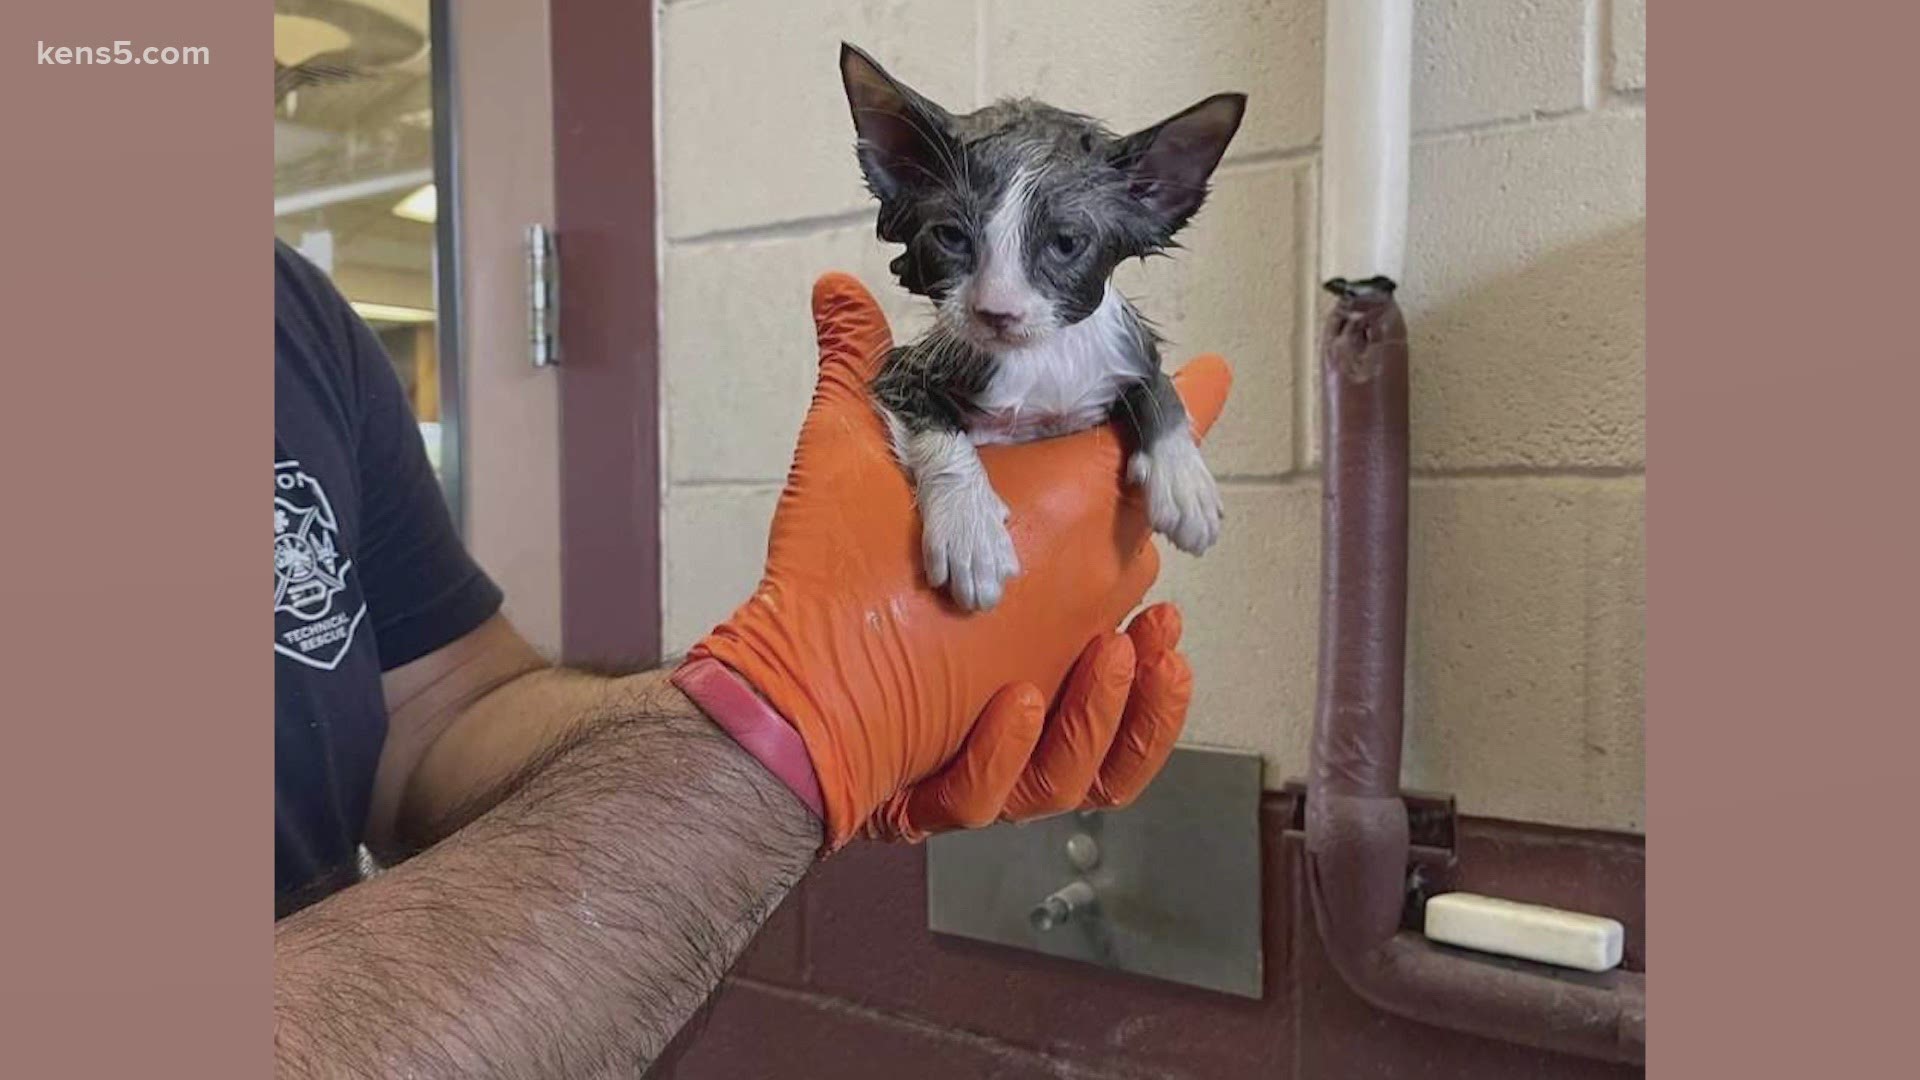 The family who alerted the firefighters to the stuck cat said they would adopt the animal. Firefighters used an electric saw to carefully free the feline.